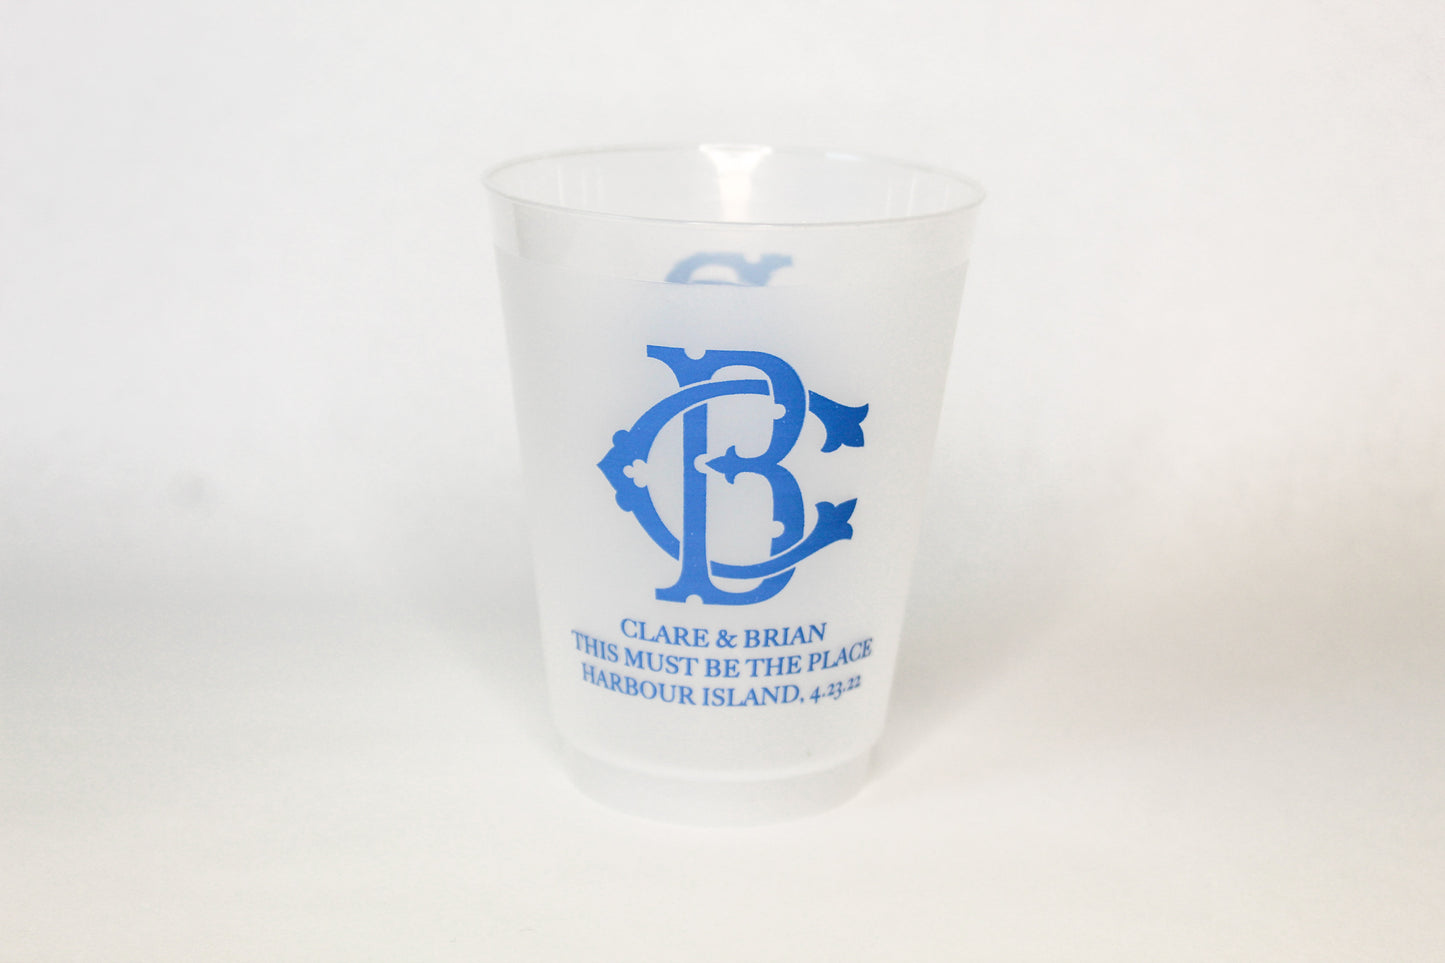 Chic Monogram Party Cups